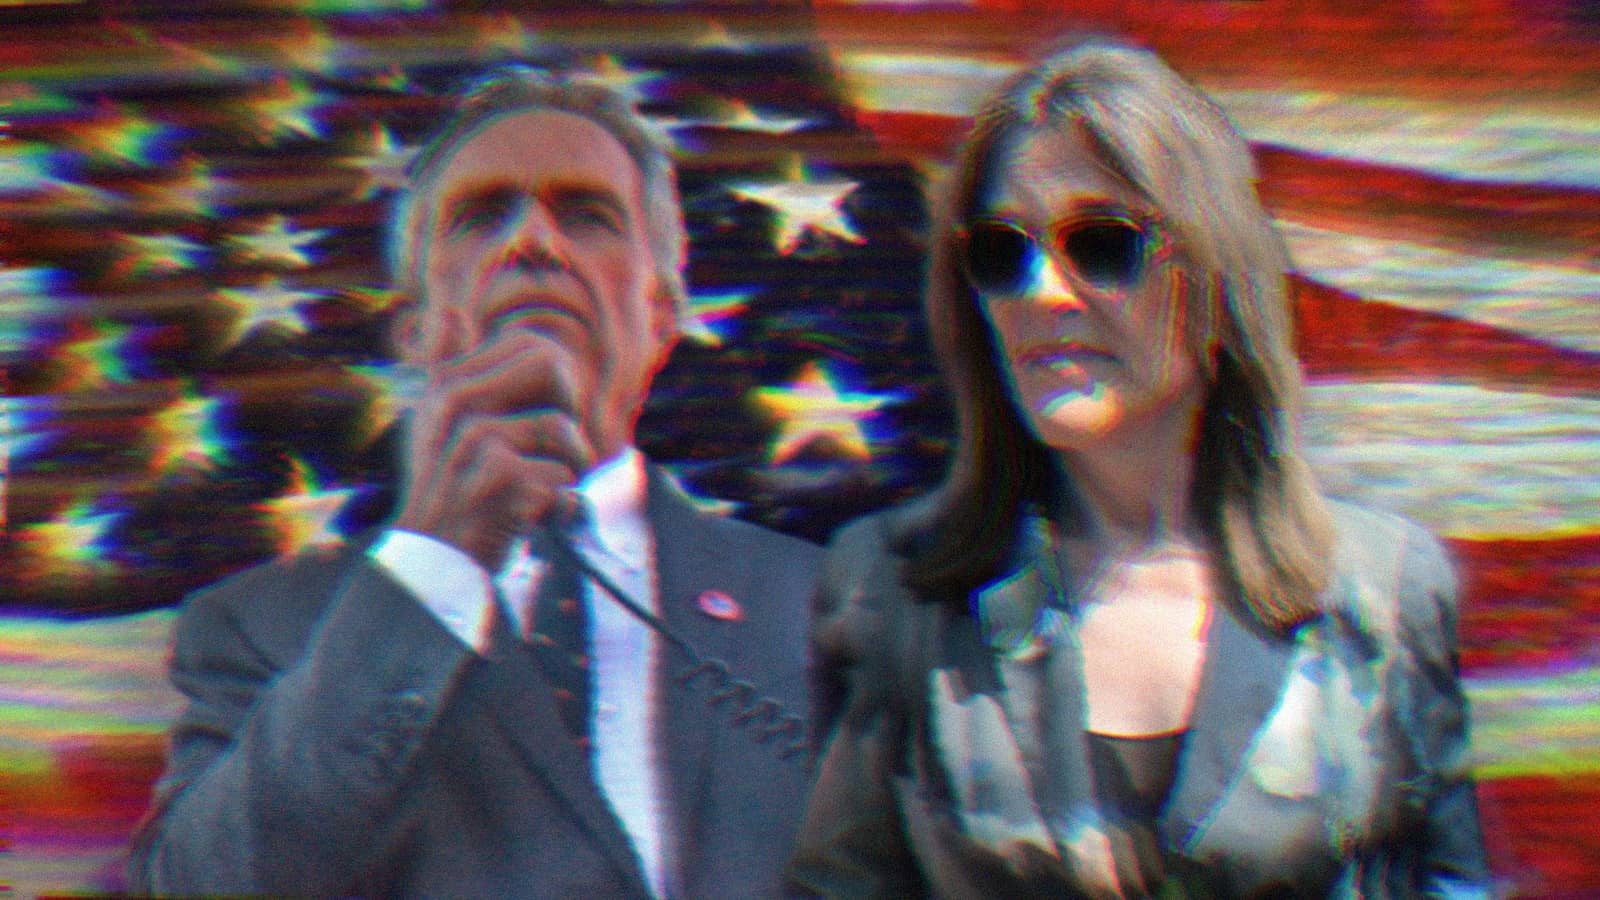 Composite image of Robert F. Kennedy Jr. and Marianne Williamson over an American flag background